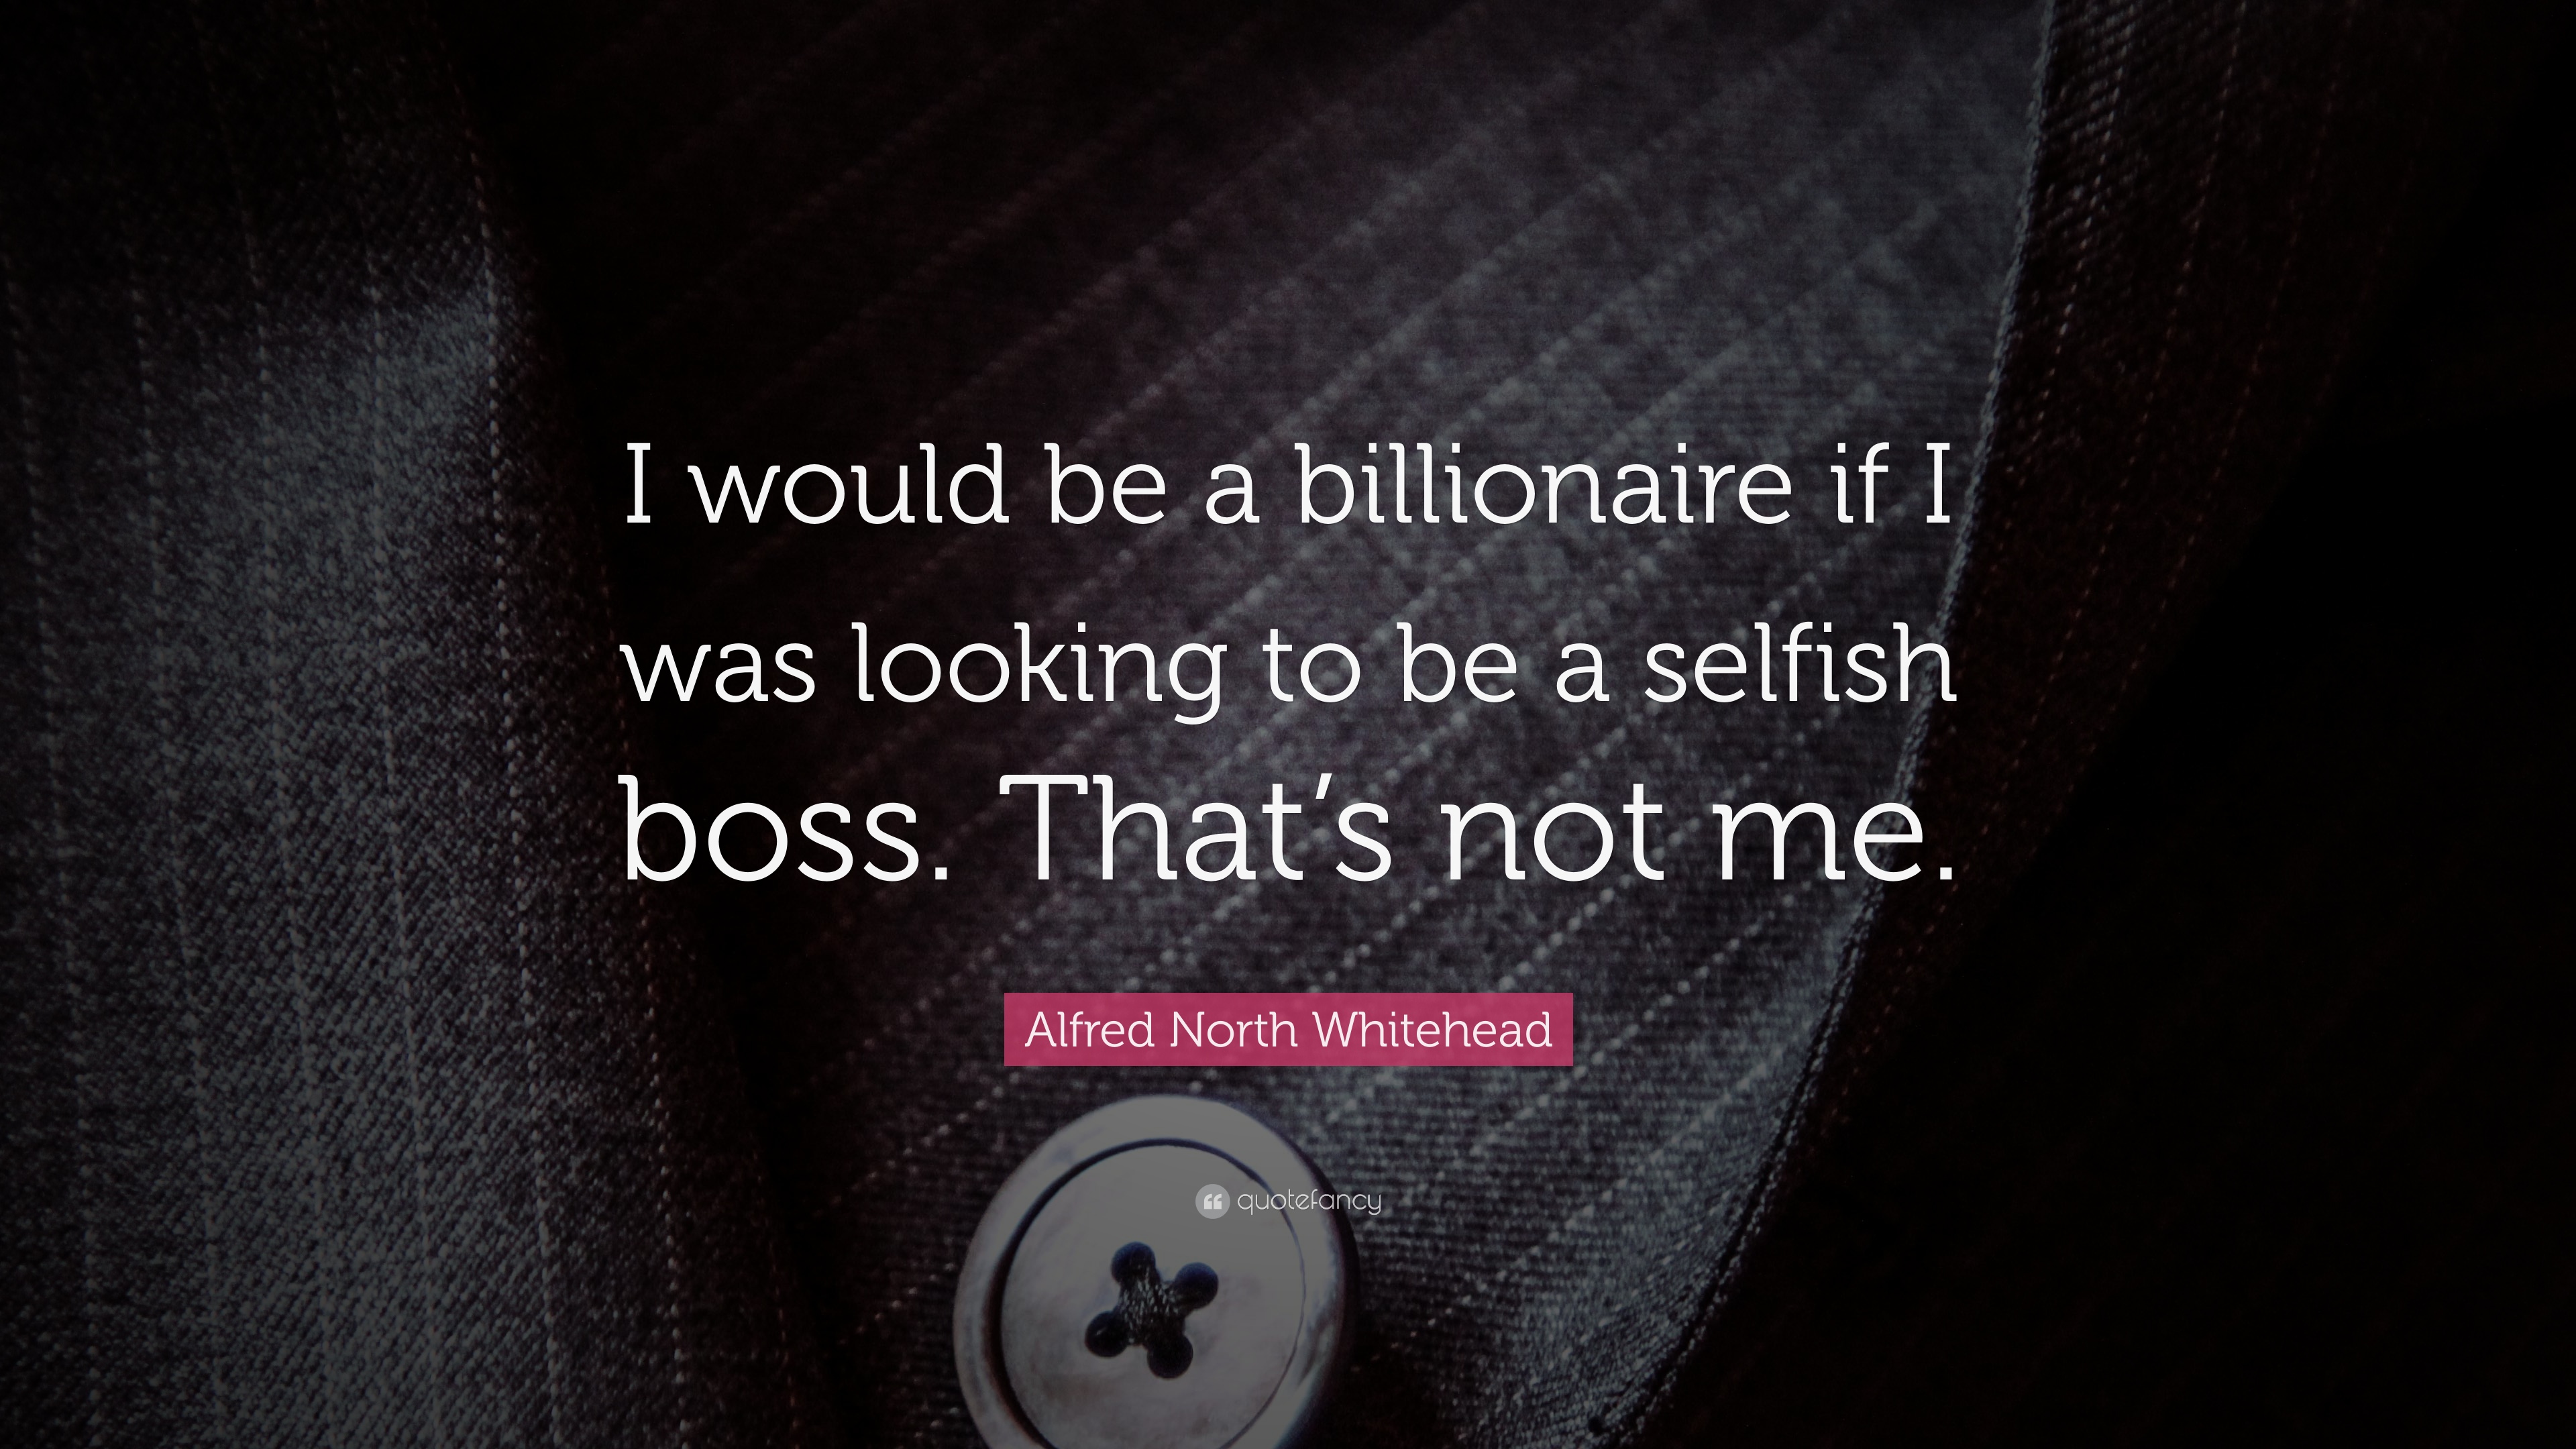 Alfred North Whitehead Quote: “I would be a billionaire if I was